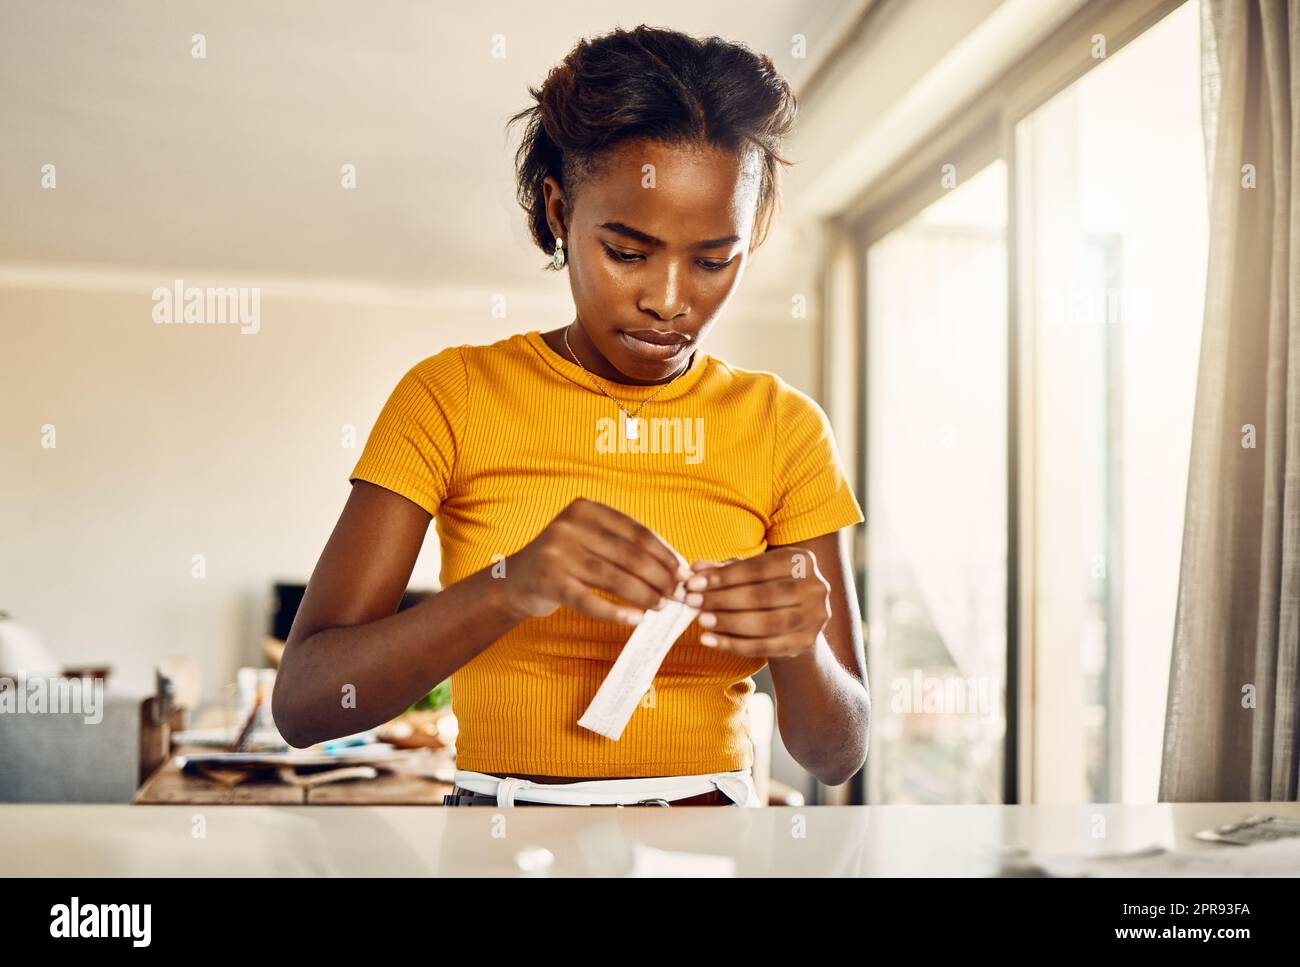 Testing for covid or coronavirus with a rapid antigen test kit at home. African young woman opening a screening kit to diagnose a virus or infection during the pandemic from her house Stock Photo